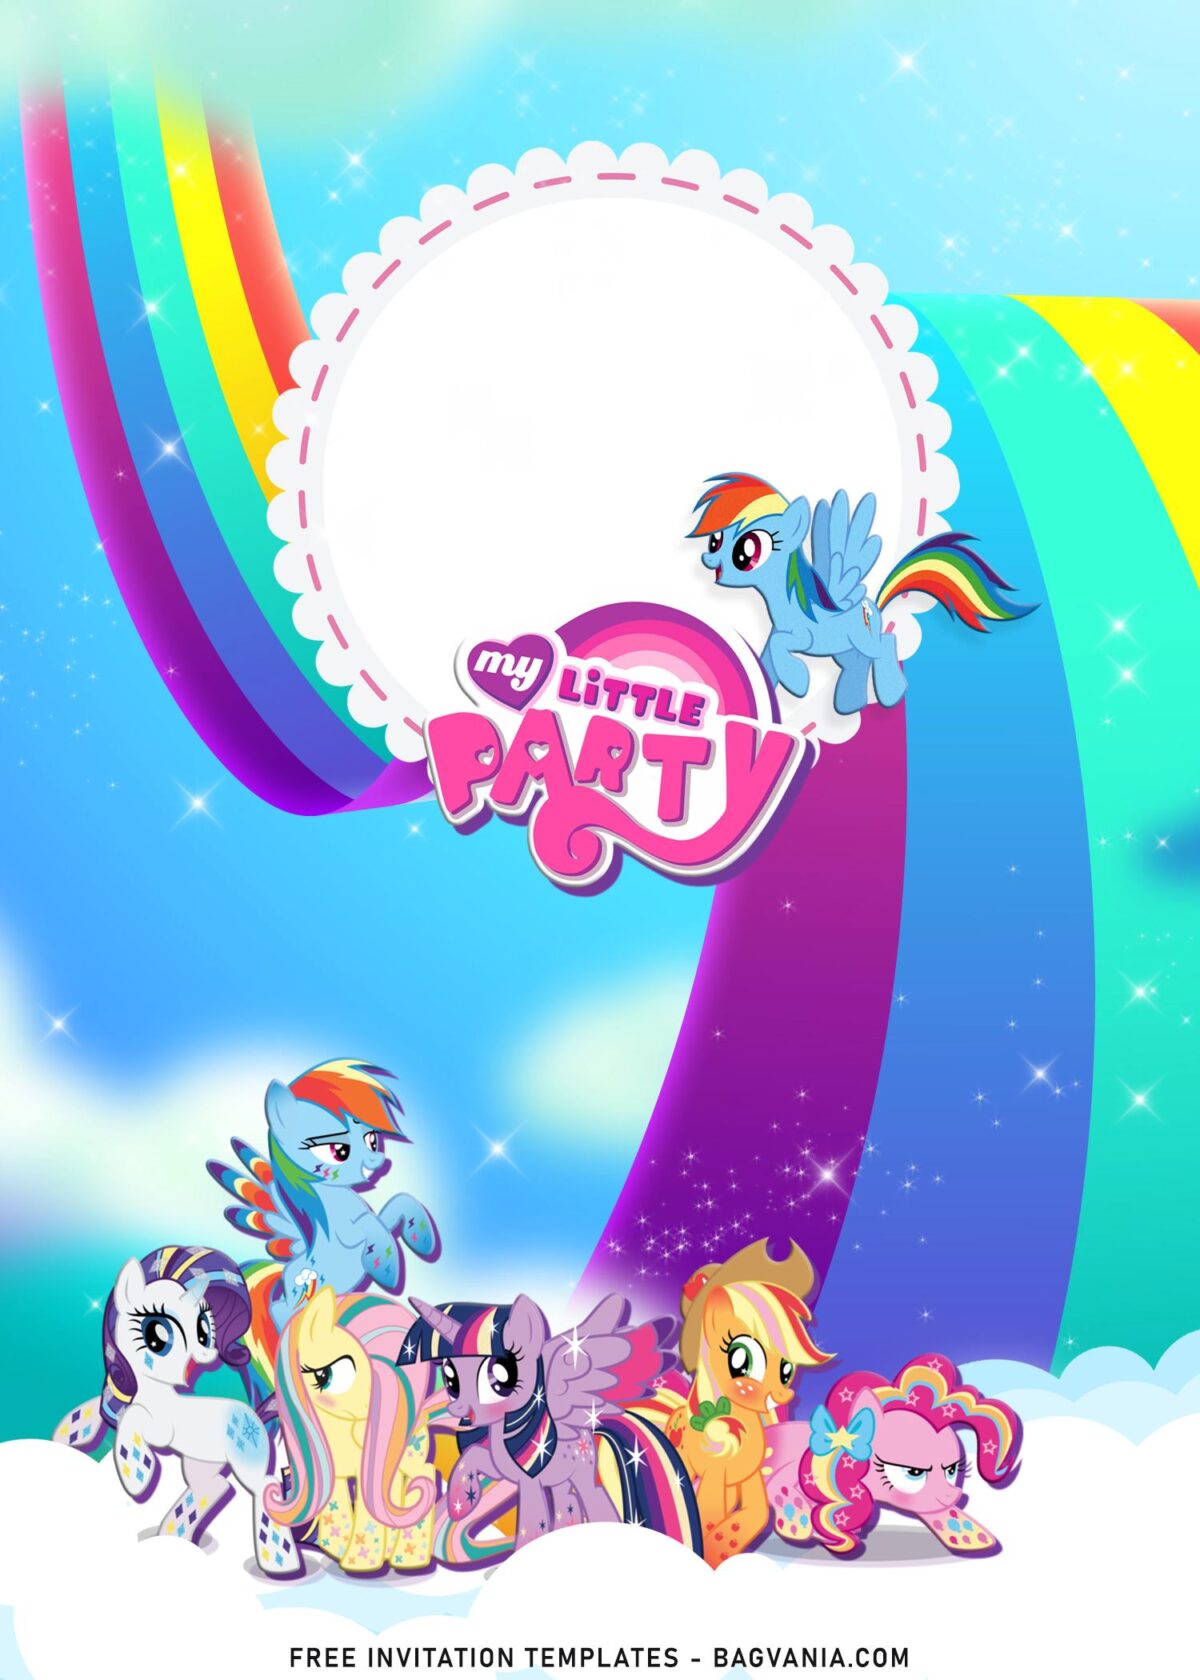 9+ Rainbow My Little Pony Birthday Invitation Templates with picture frame surrounded by cute Pony